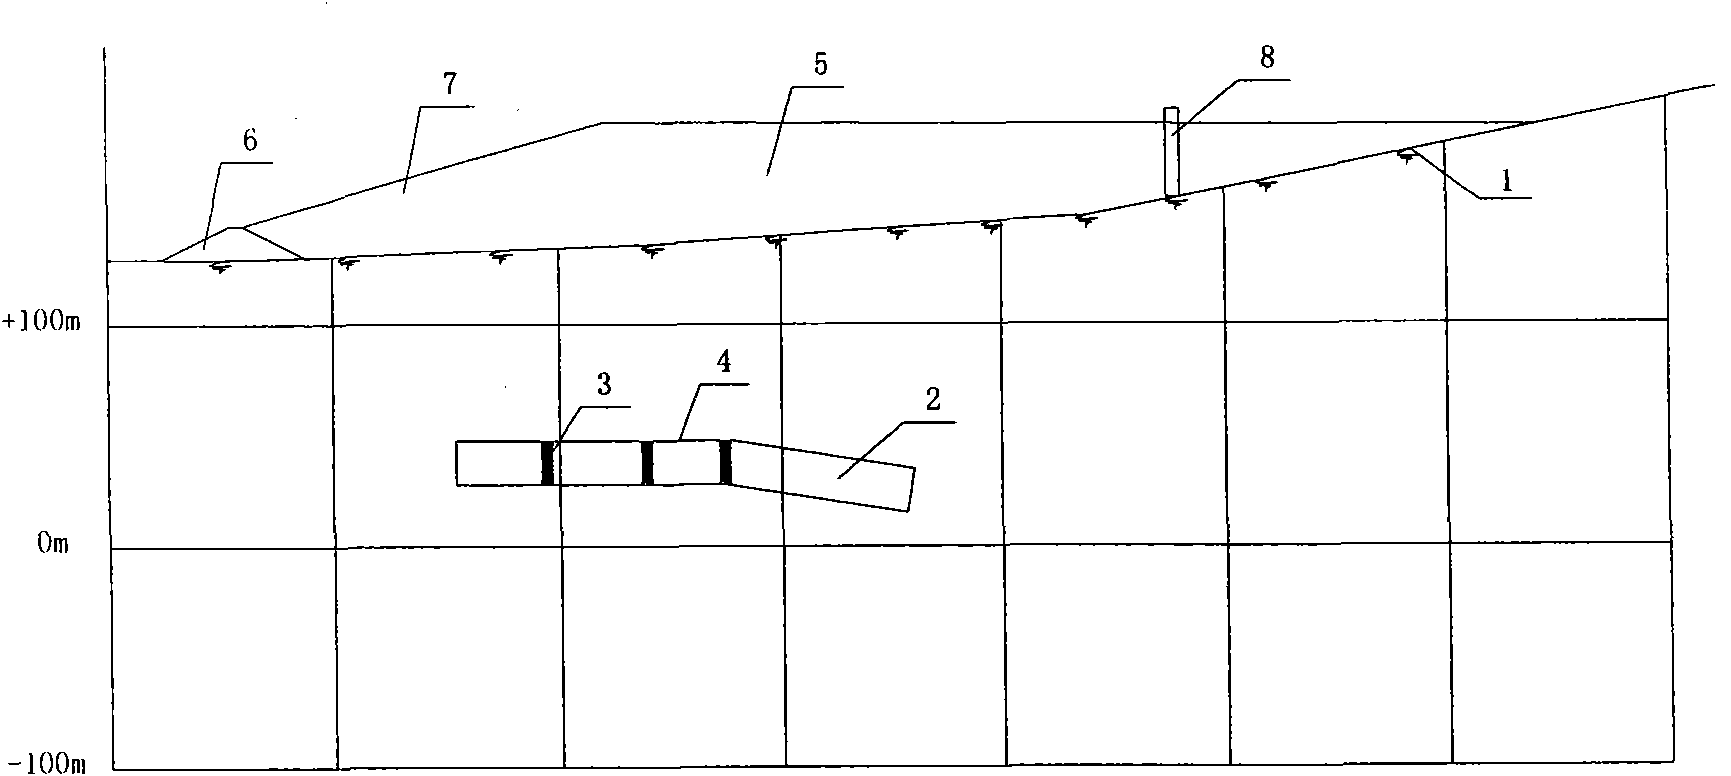 Method for directly building tailing ponds without filling positions above goaf